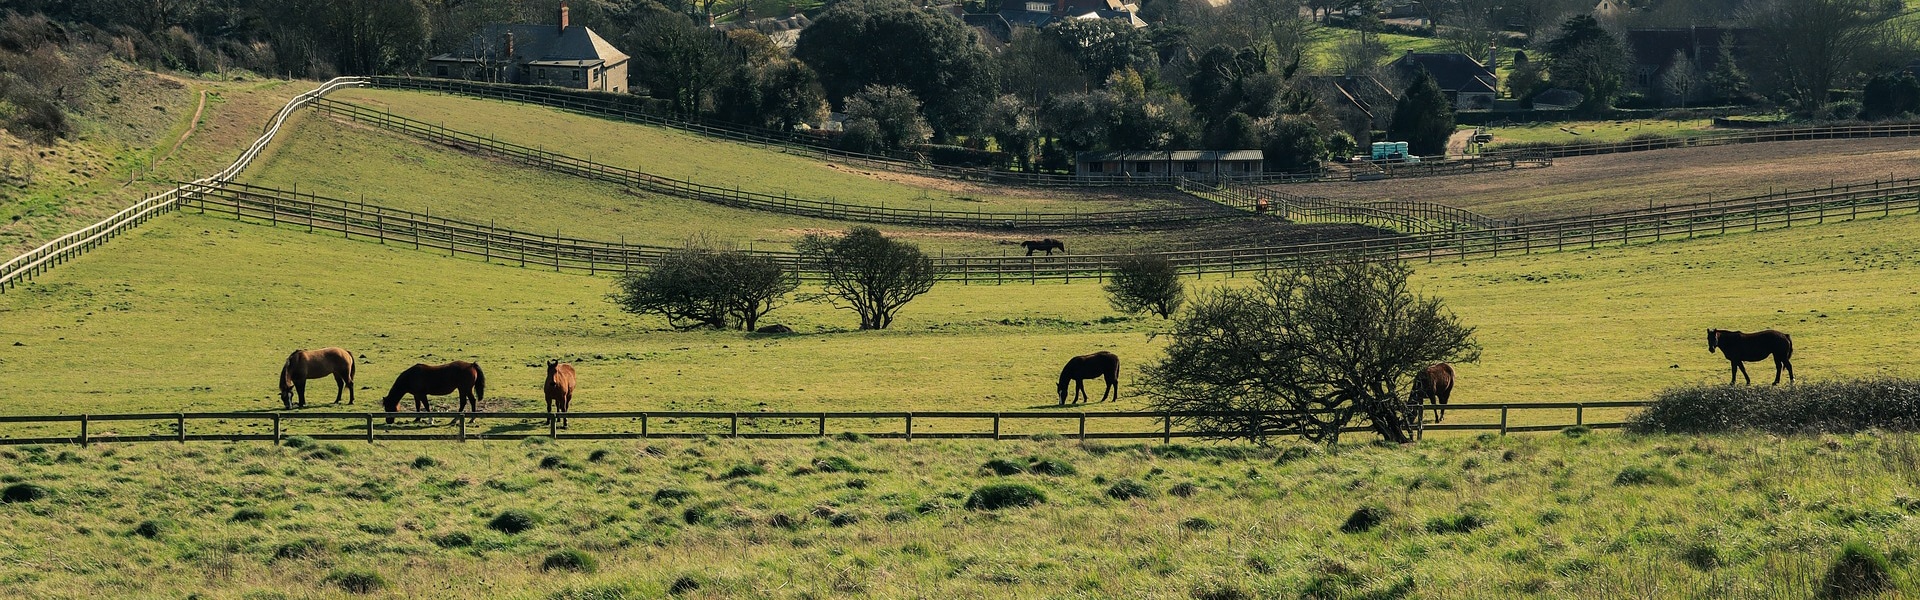 Horses graving in a field